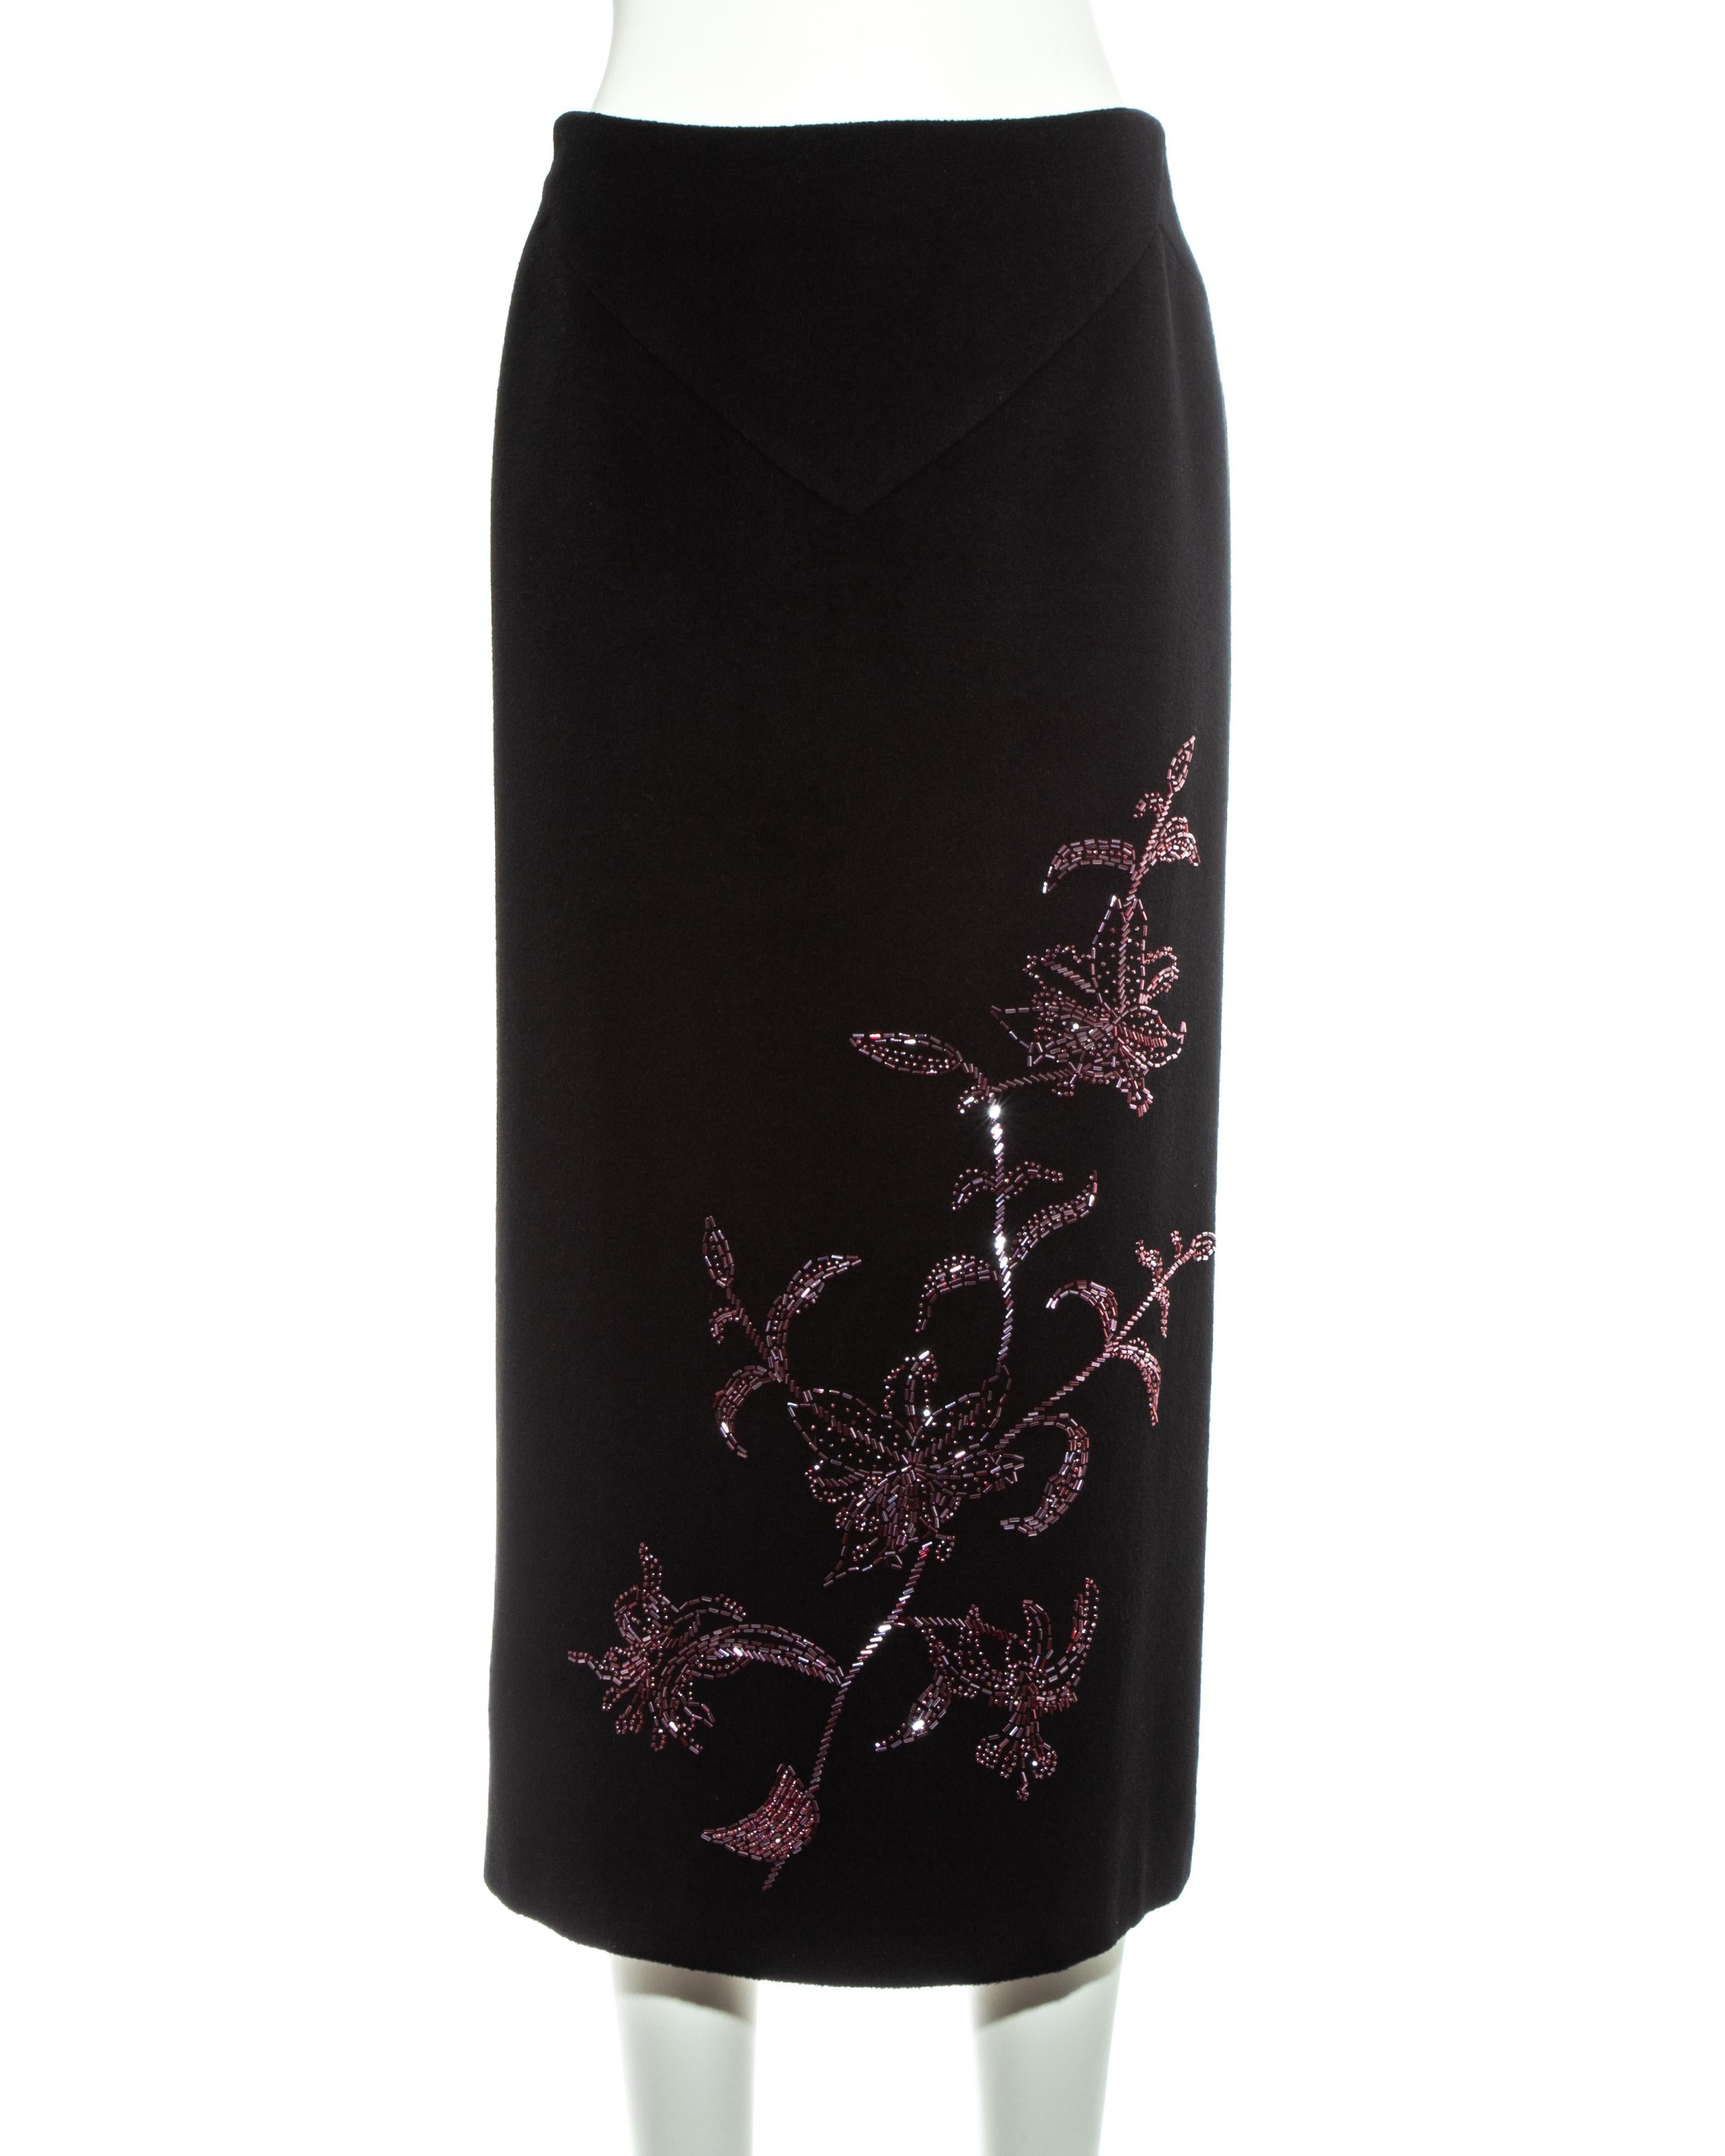 Alexander McQueen black cashmere pencil skirt with red floral beading, fw 1998 1